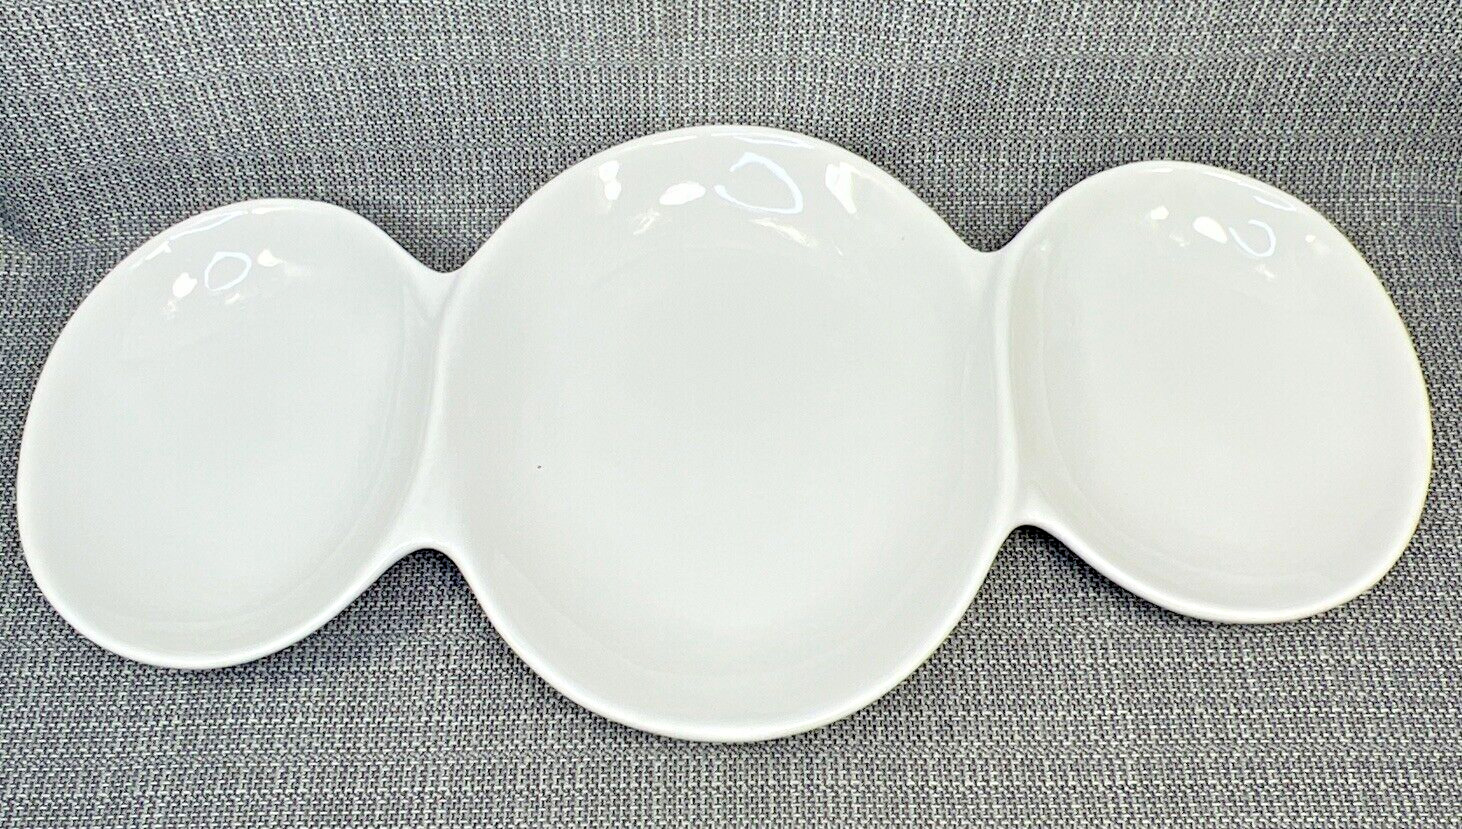 Three Section Divided Serving Tray by Colin Cowie for JC Penney Home Collection